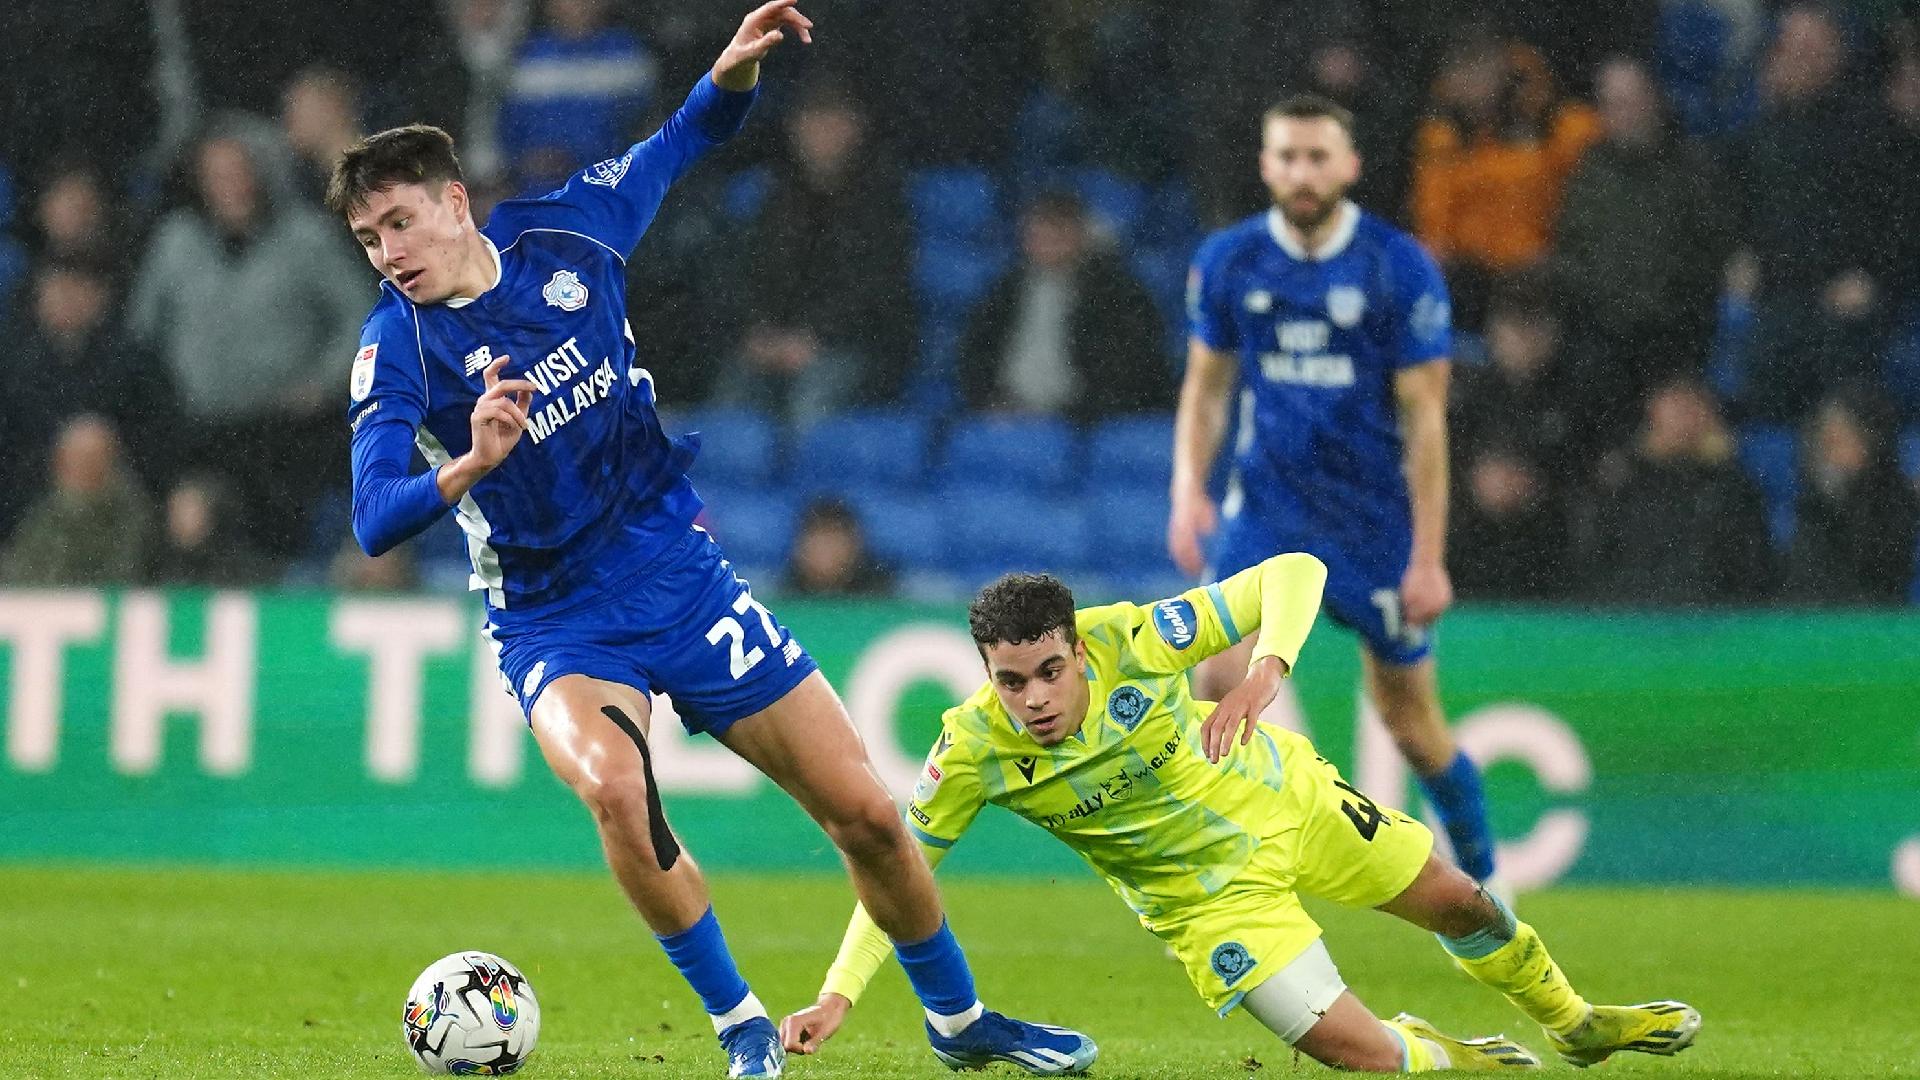 Little to excite the fans as Cardiff and Blackburn draw a blank